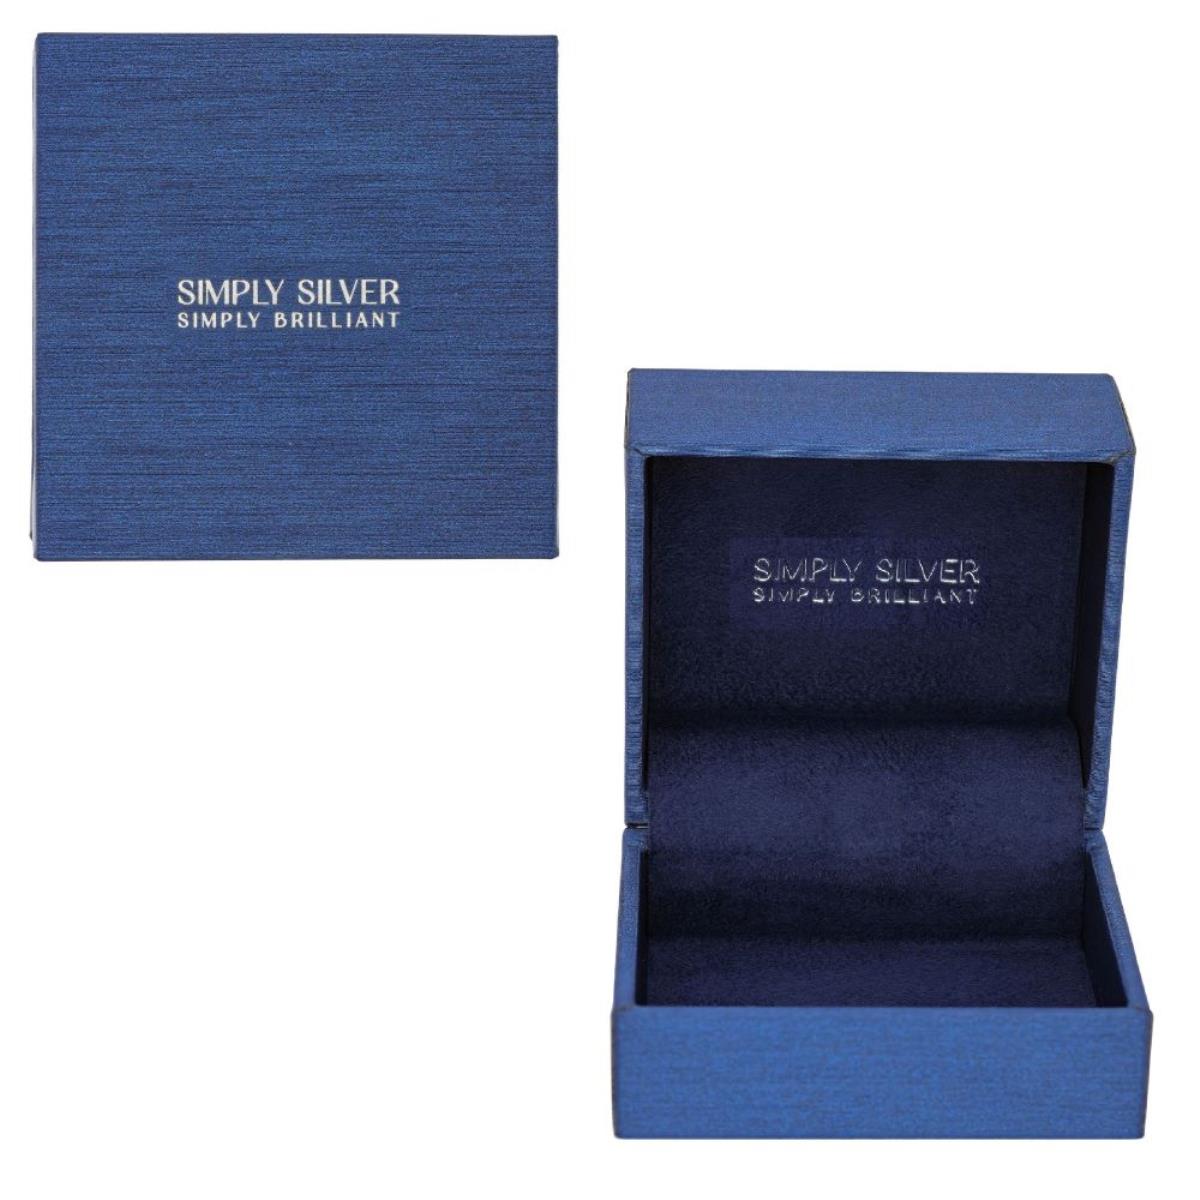 Simply Silver Simply Brilliant Hinged 60x60x45mm Navy Silver Foil box